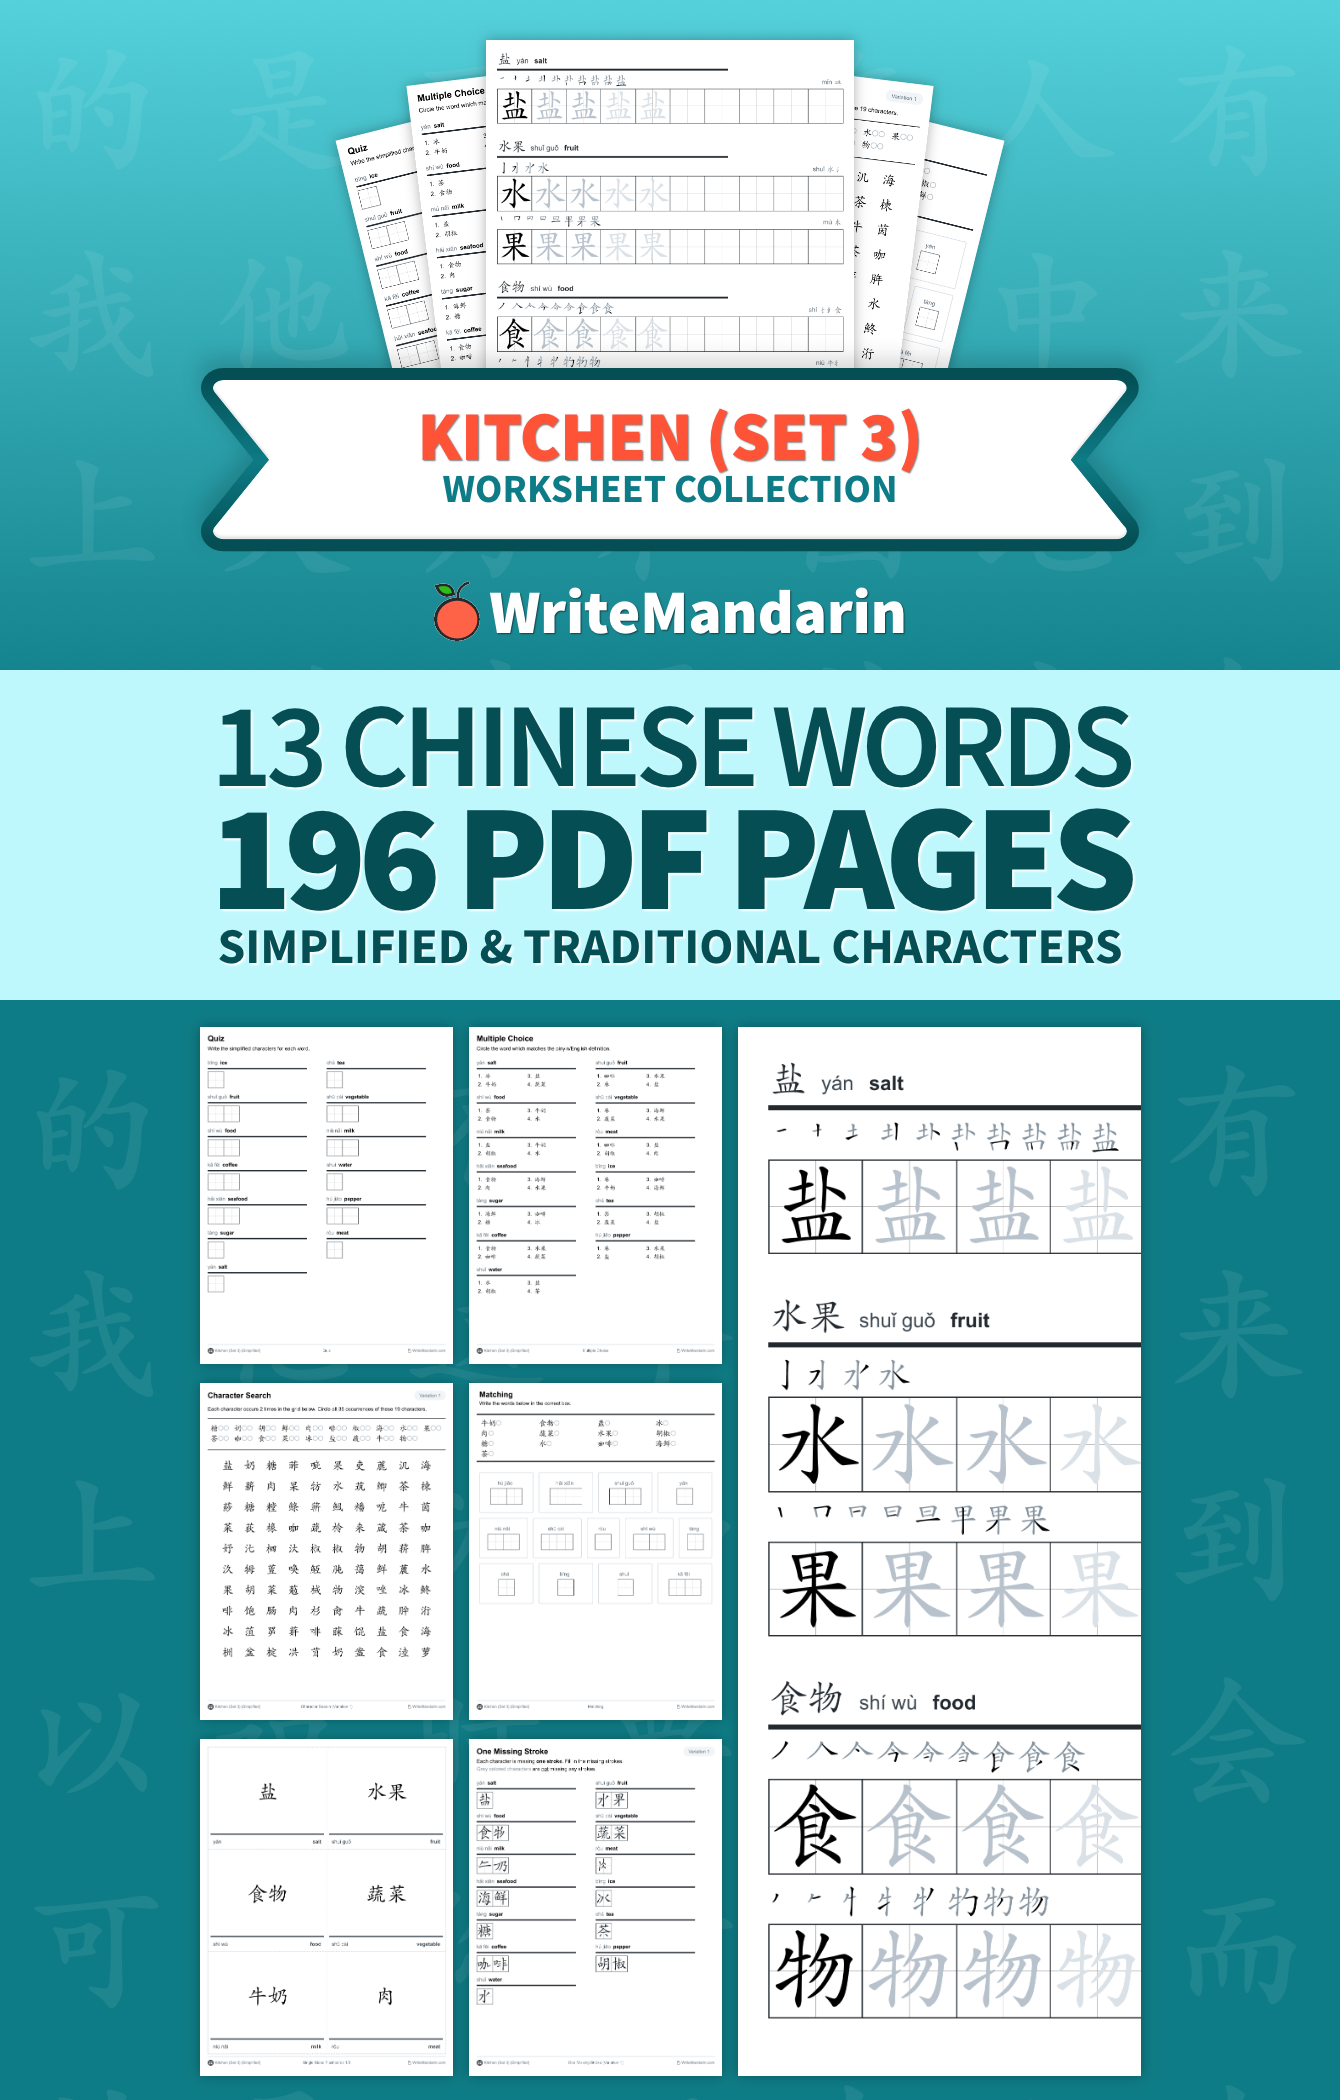 Preview image of Kitchen (Set 3) worksheet collection